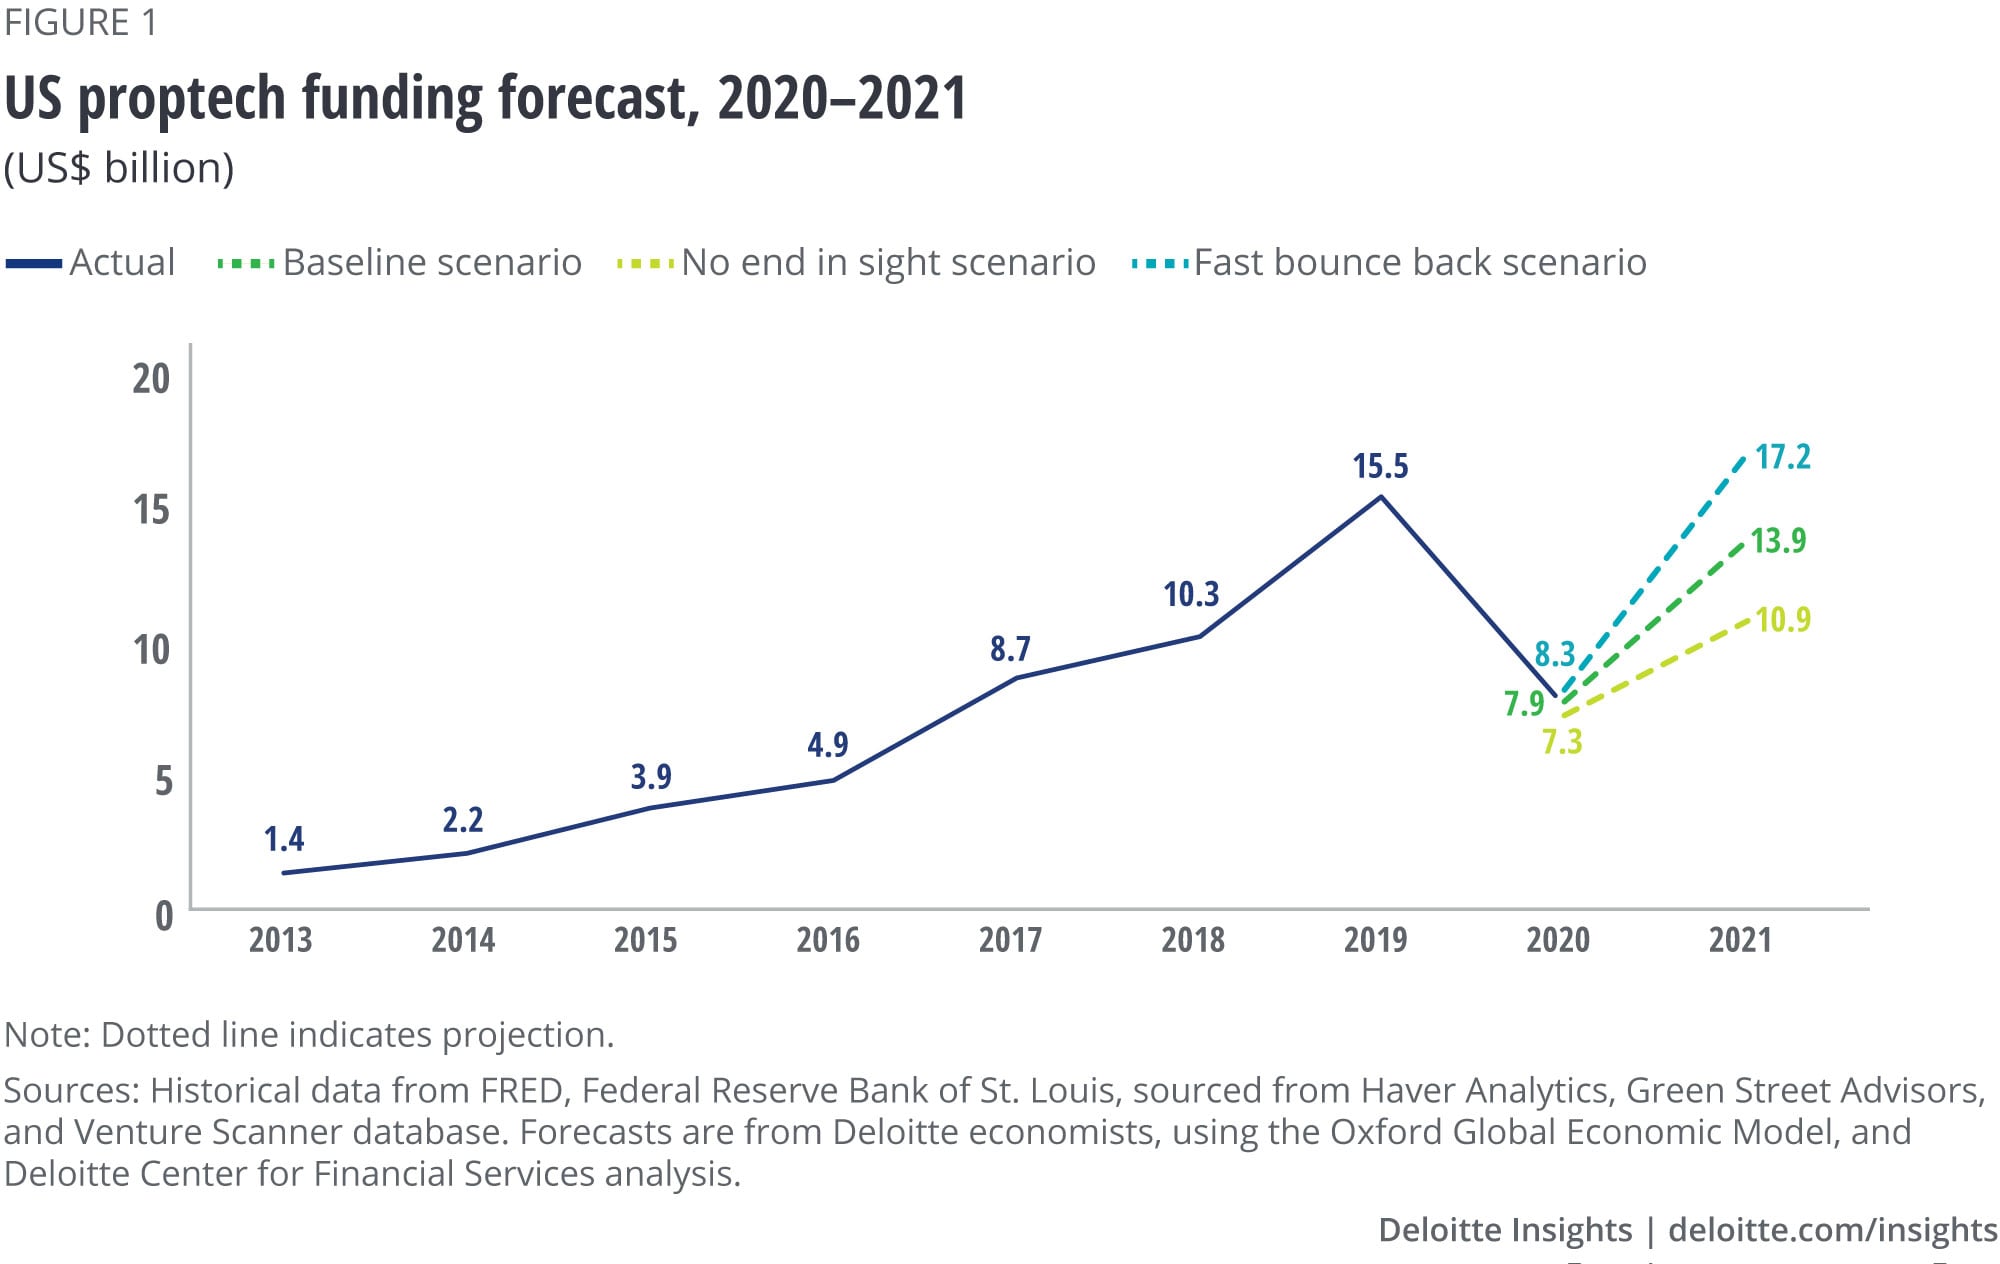 The US proptech funding forecast